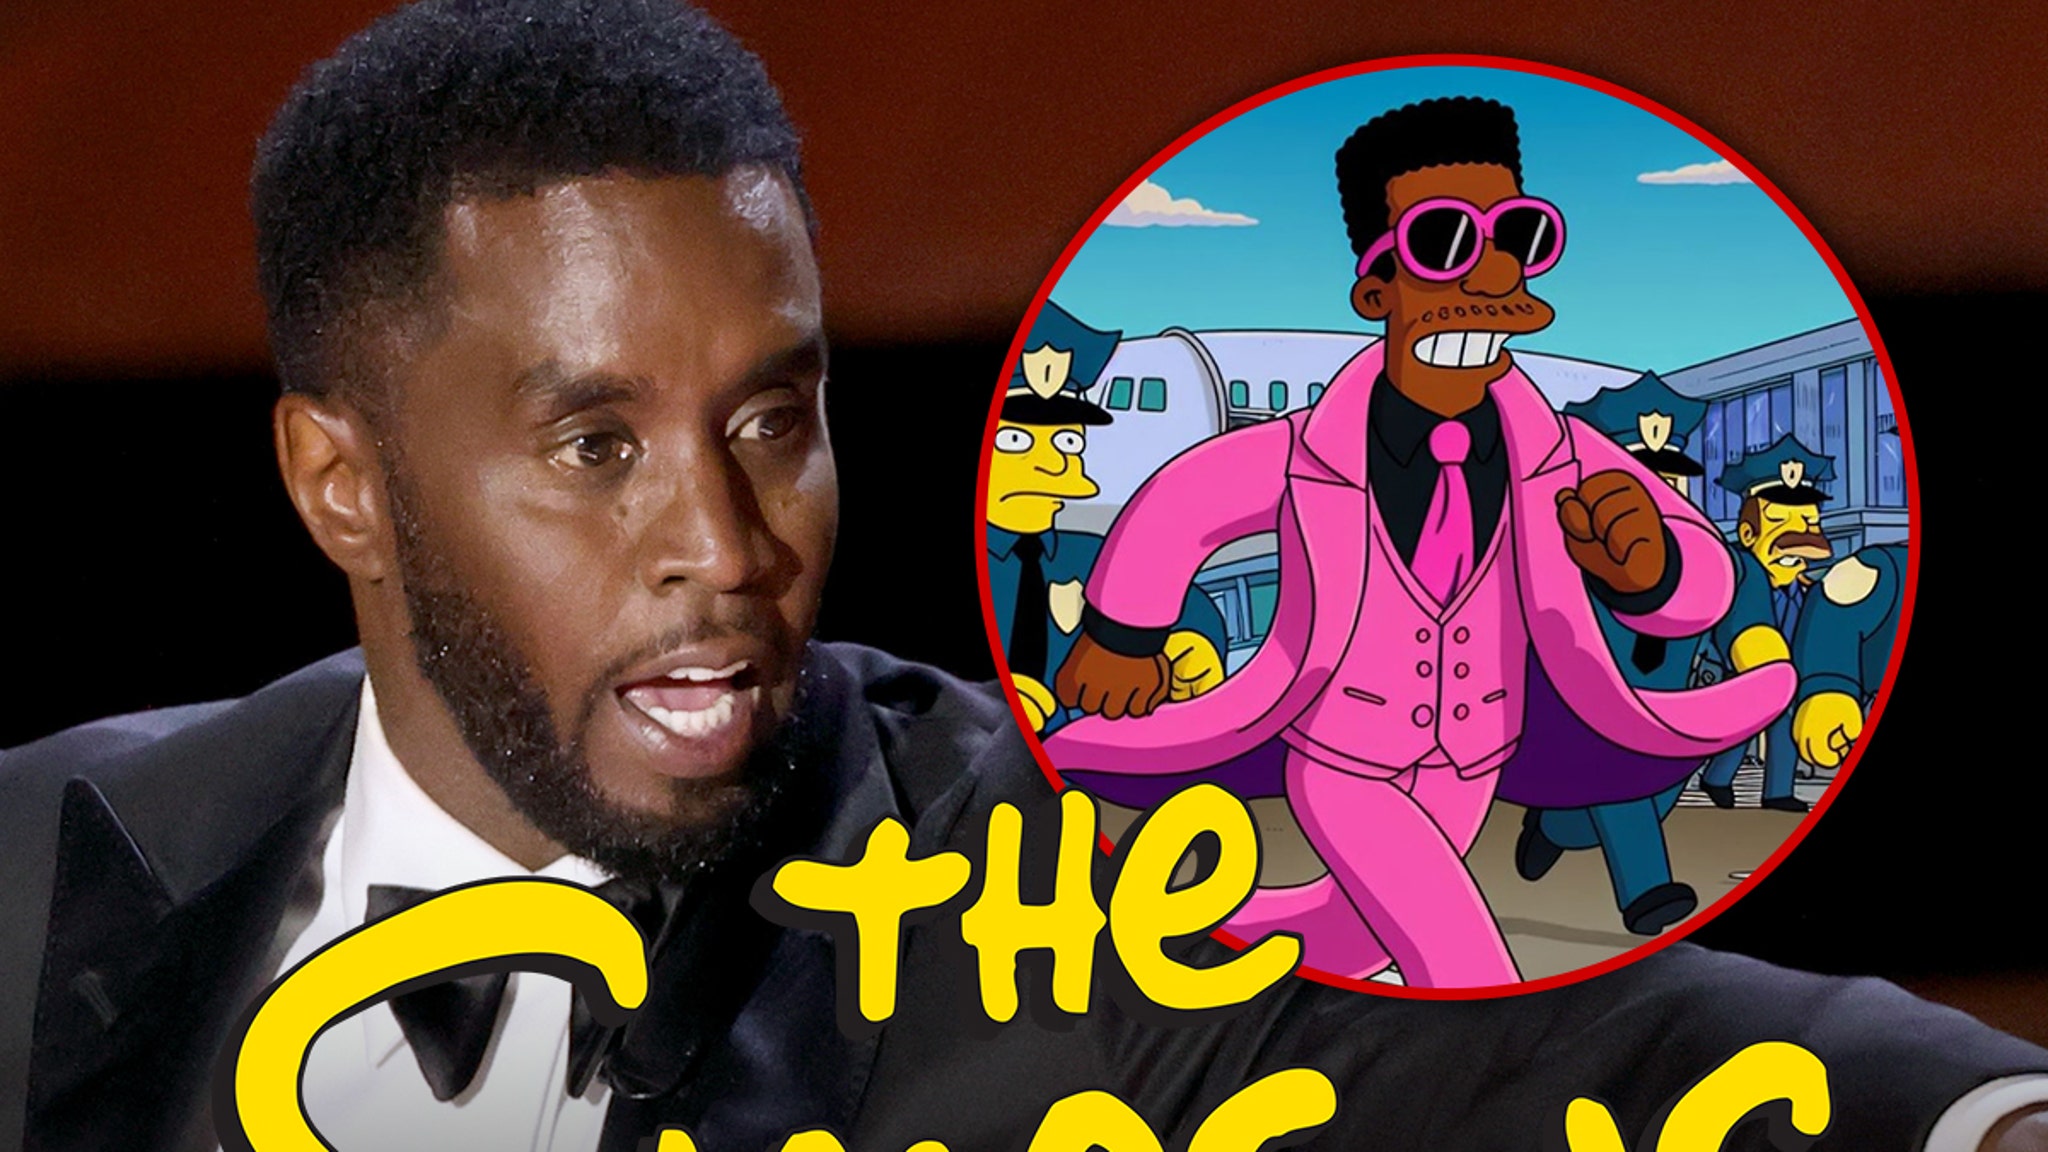 'Simpsons' showrunner says the show didn't predict Diddy and considers the viral image fake